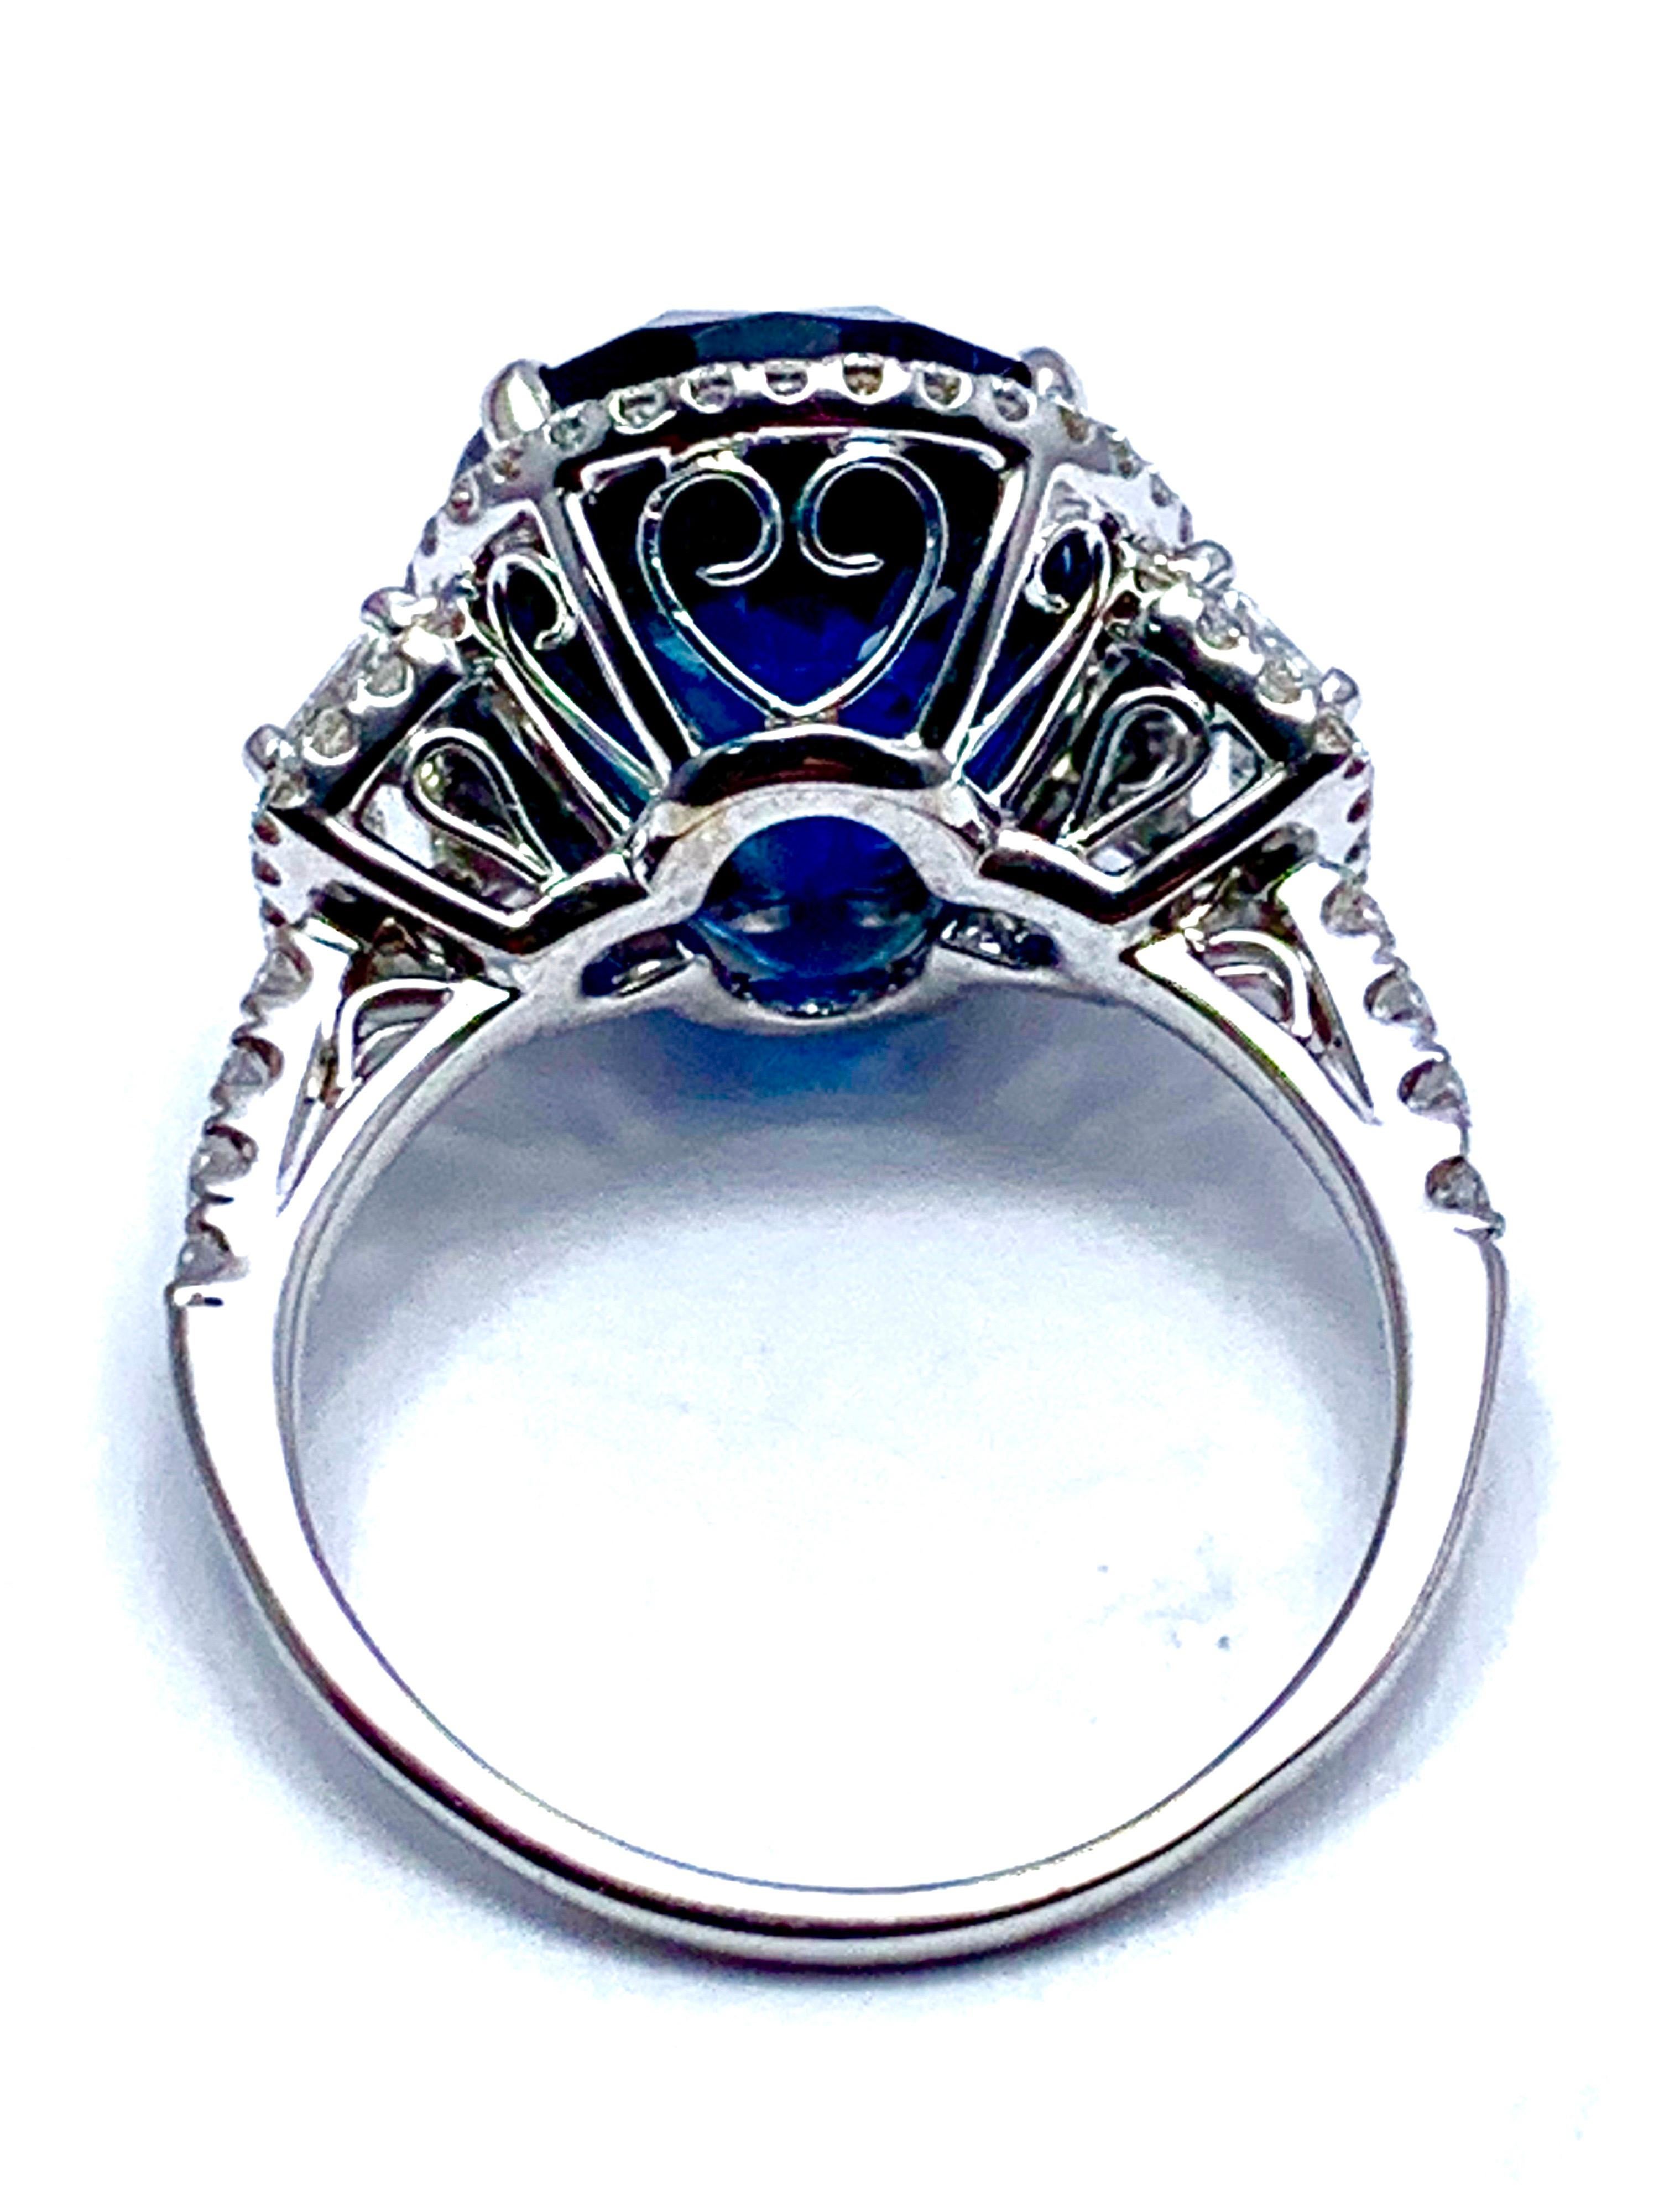 11.38 Carat Oval Sapphire and Diamond 18 Karat White Gold Cocktail Ring In Excellent Condition For Sale In Chevy Chase, MD